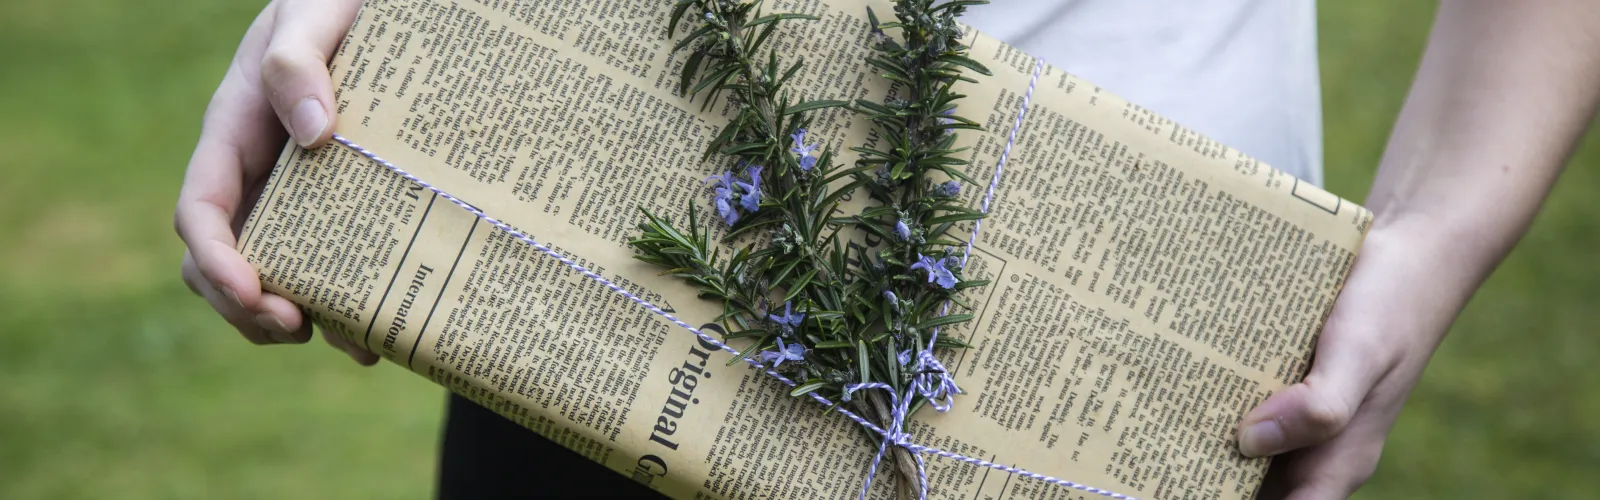 Gift with newspaper gift wrap on springs on rosemary